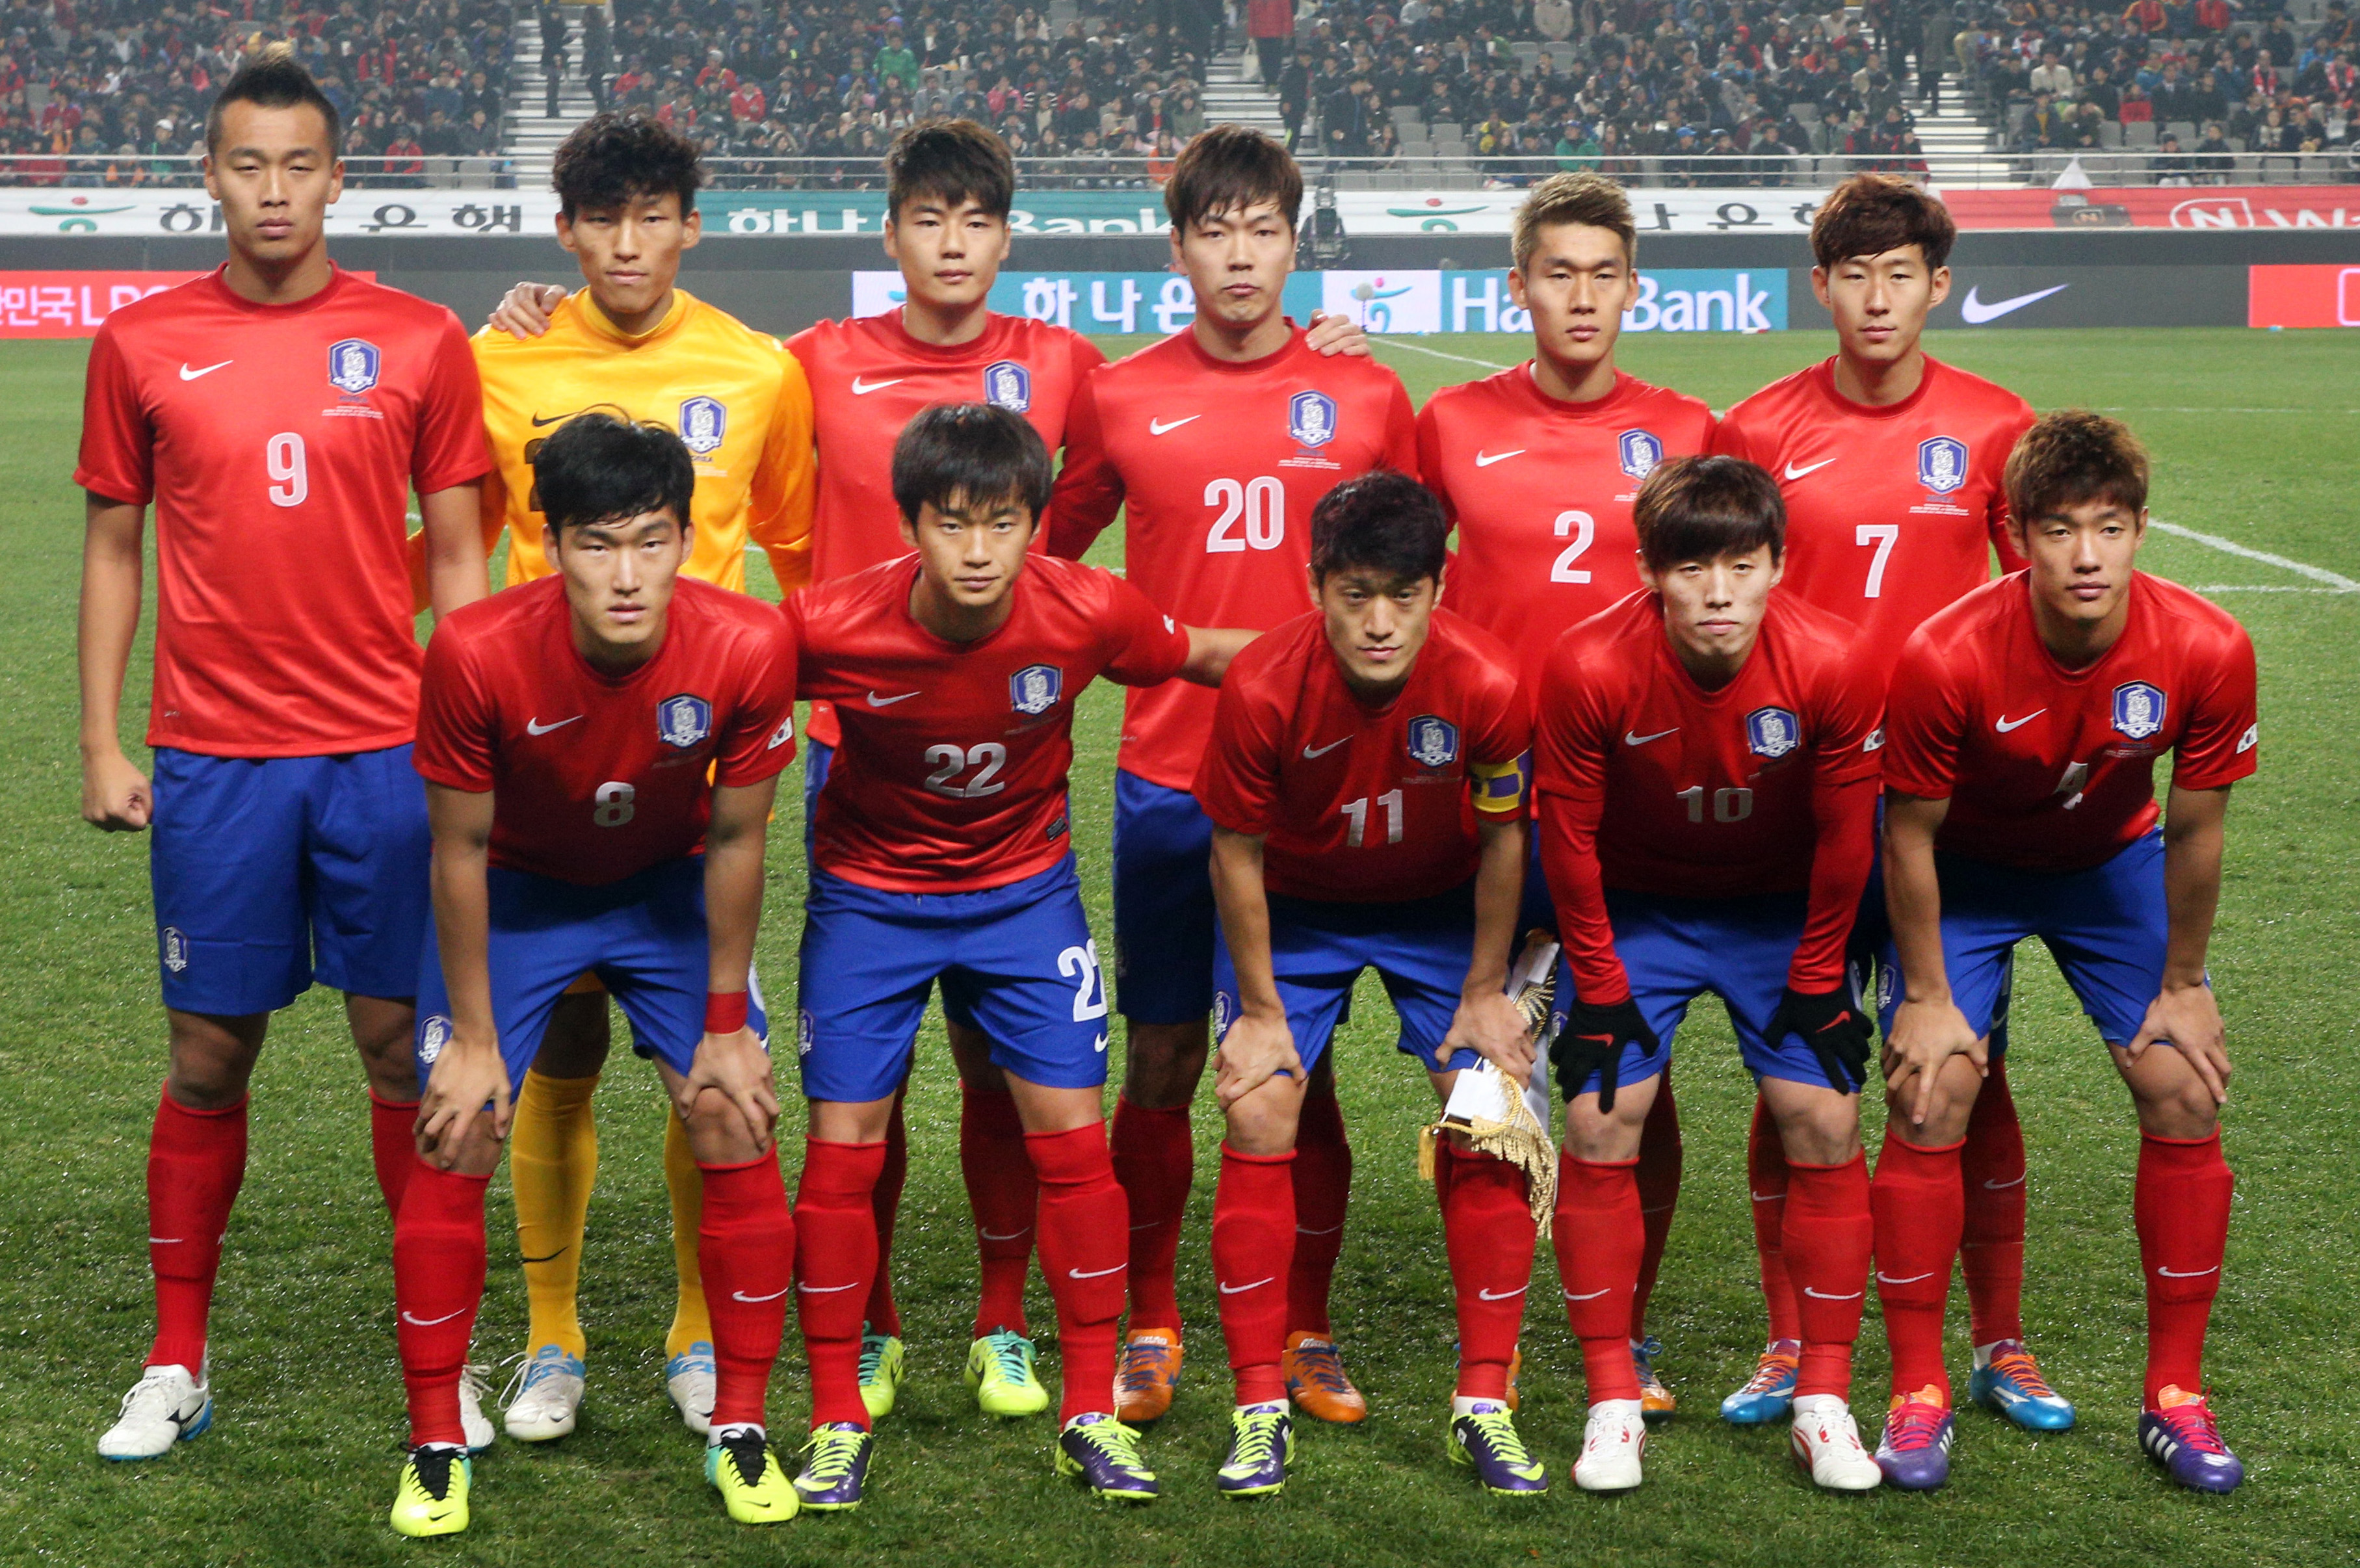 Korean national soccer team is coming to Los Angeles.